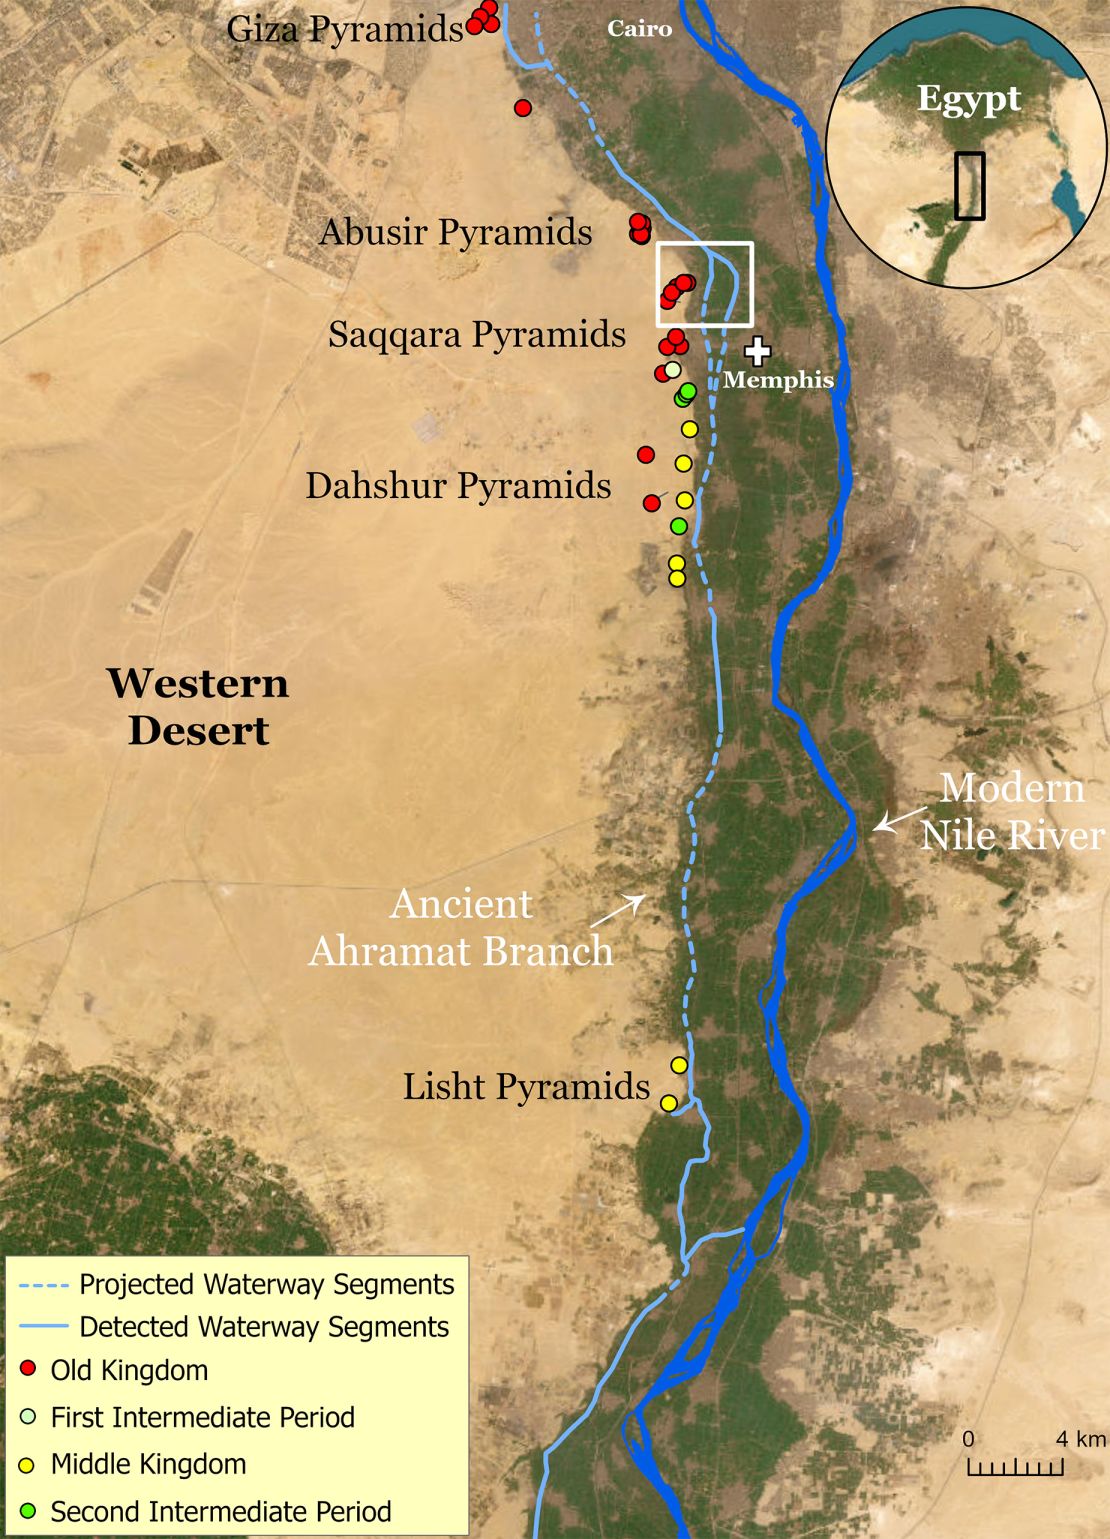 Ancient Egyptians likely used the now-extinct Ahramat Branch to build many pyramids.